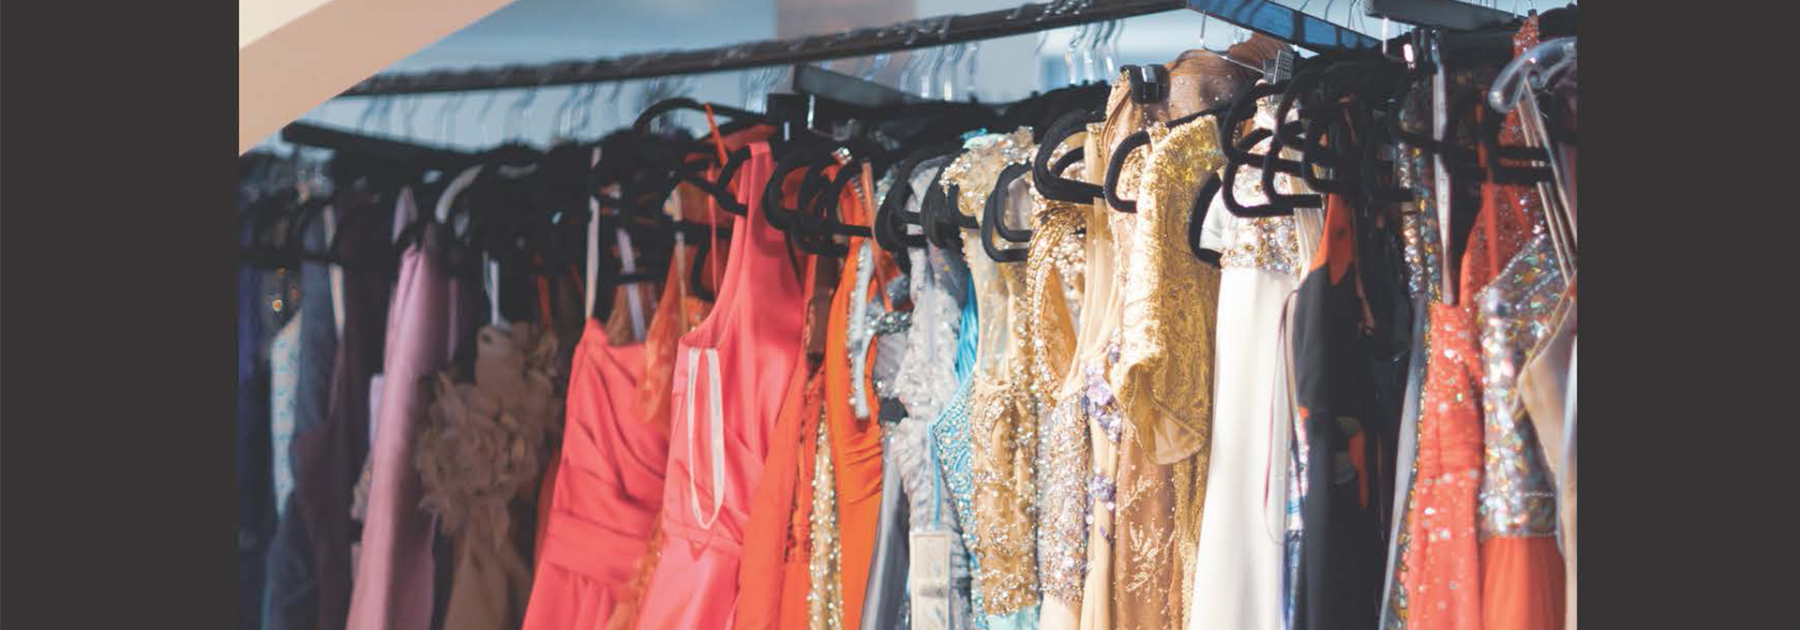 PA Nearly New Prom Dresses and DJs Sale